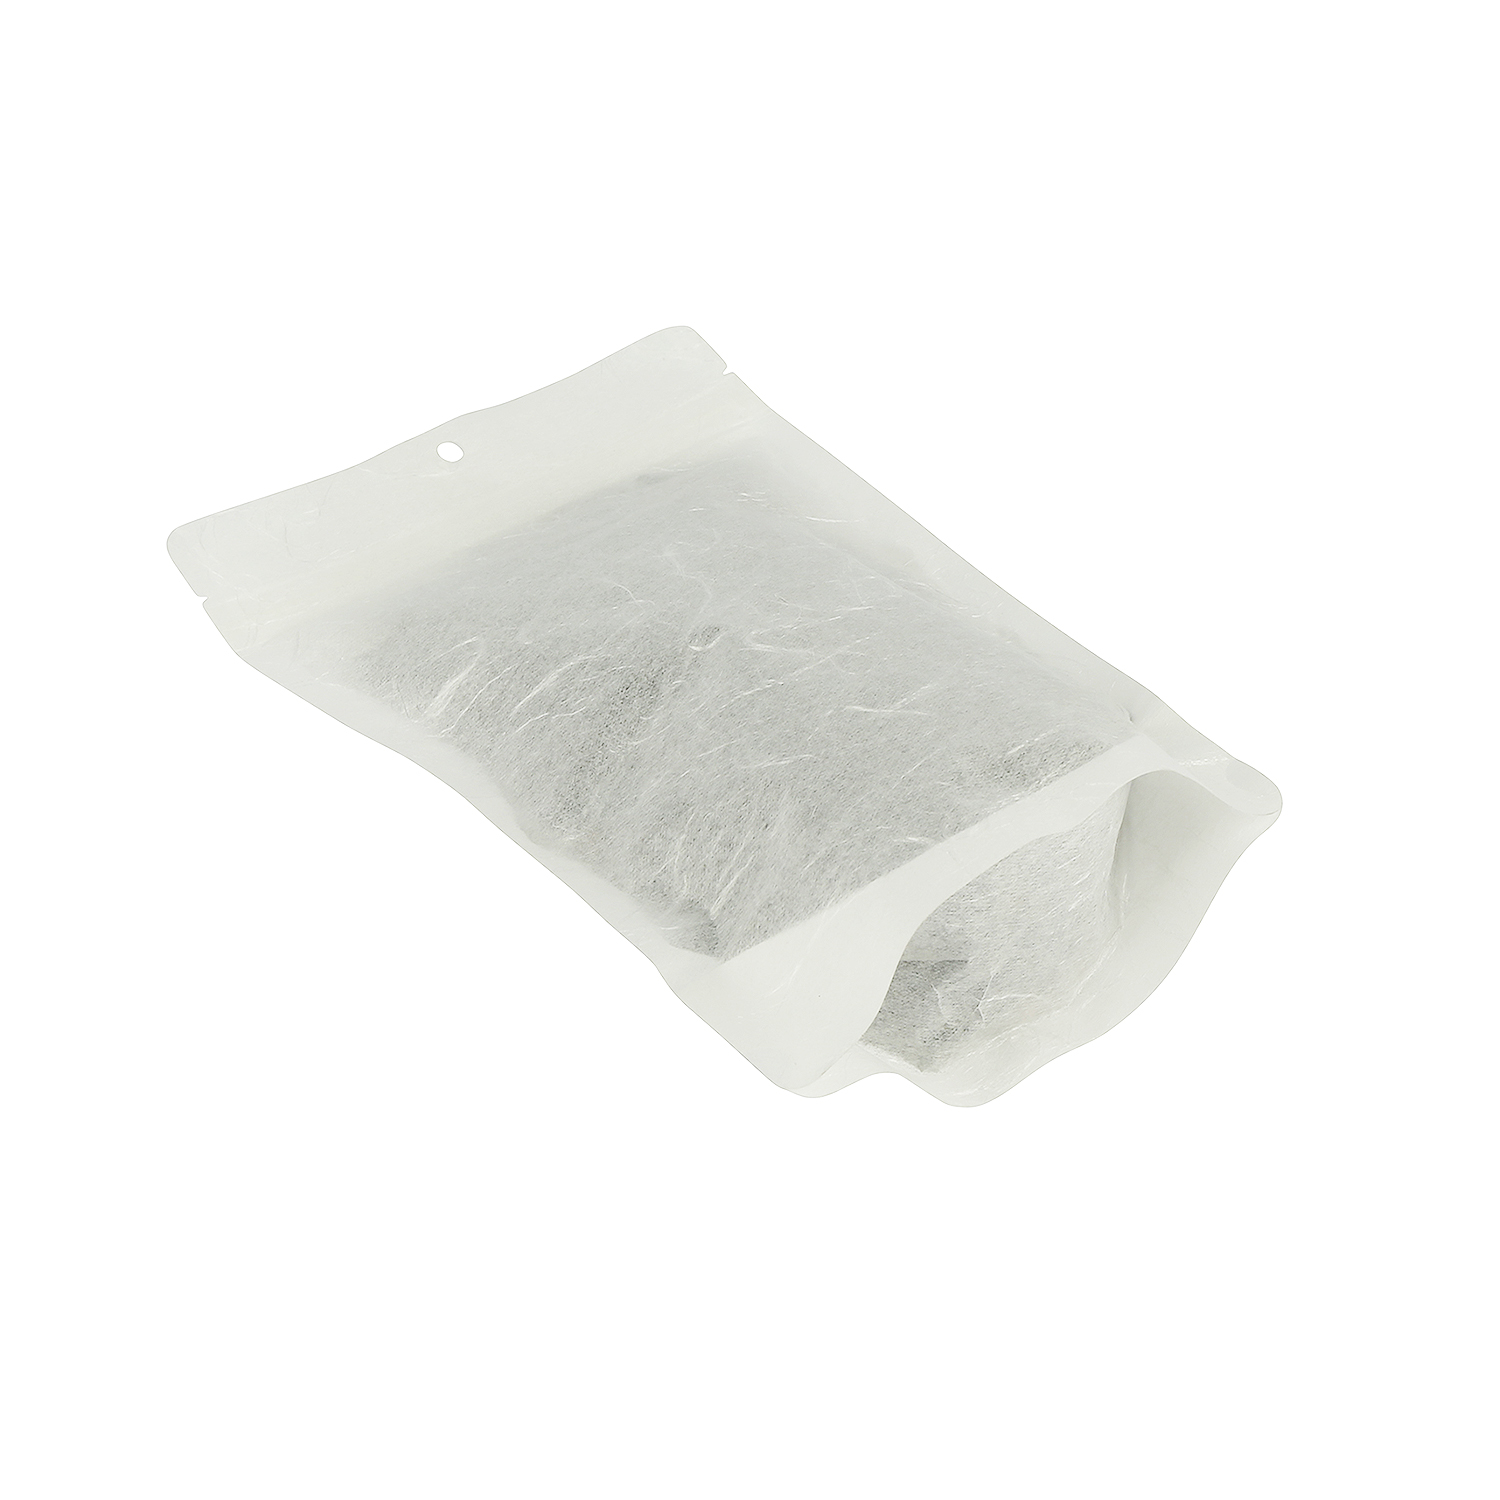 Unprinted Compostable White Rice Paper Backed Stand Up Pouches with Hang Hole & Zipper